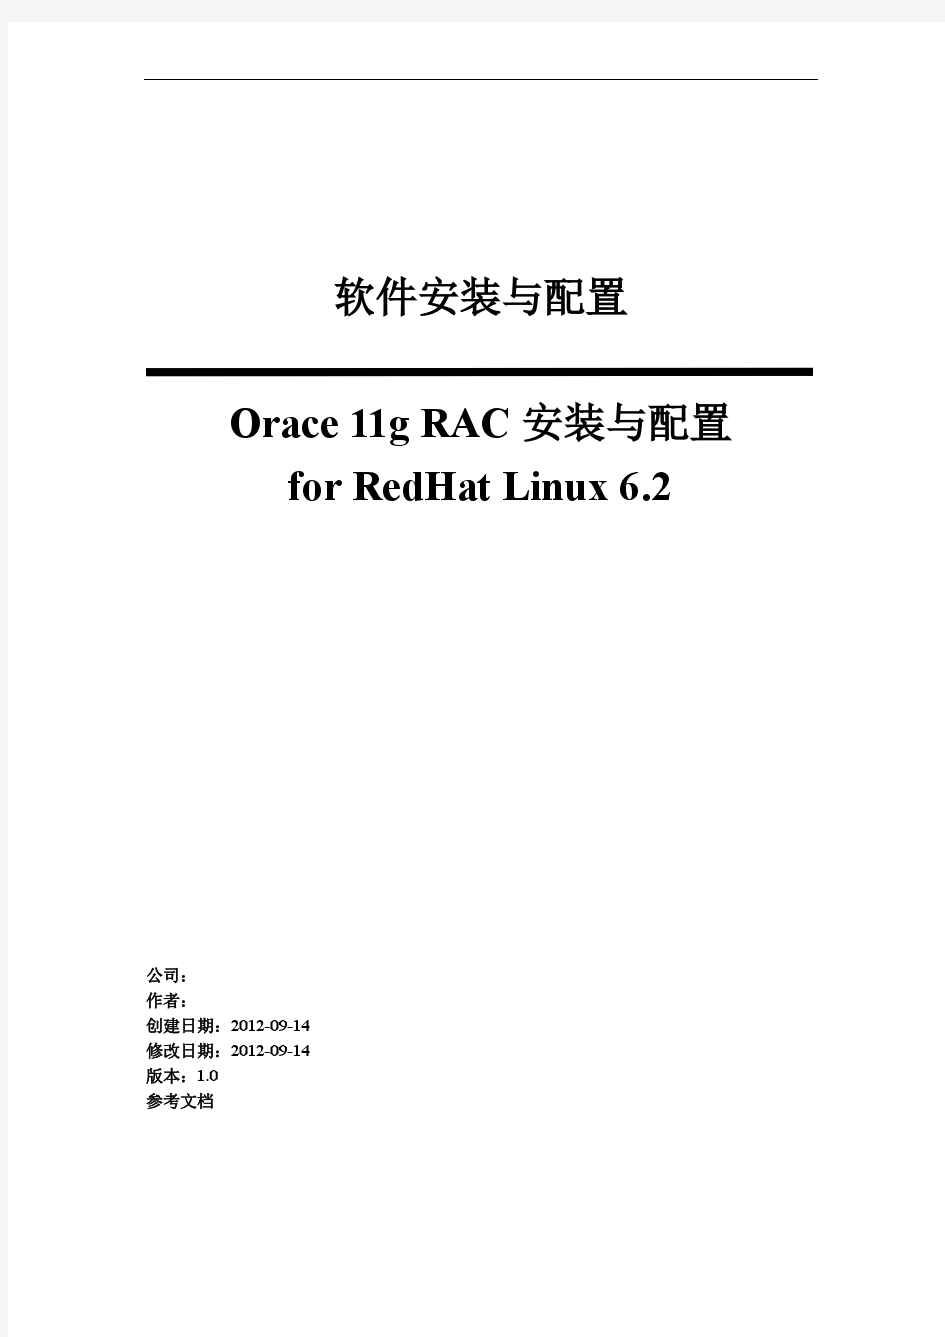 Oracle-11g-RAC安装与配置for-Linux